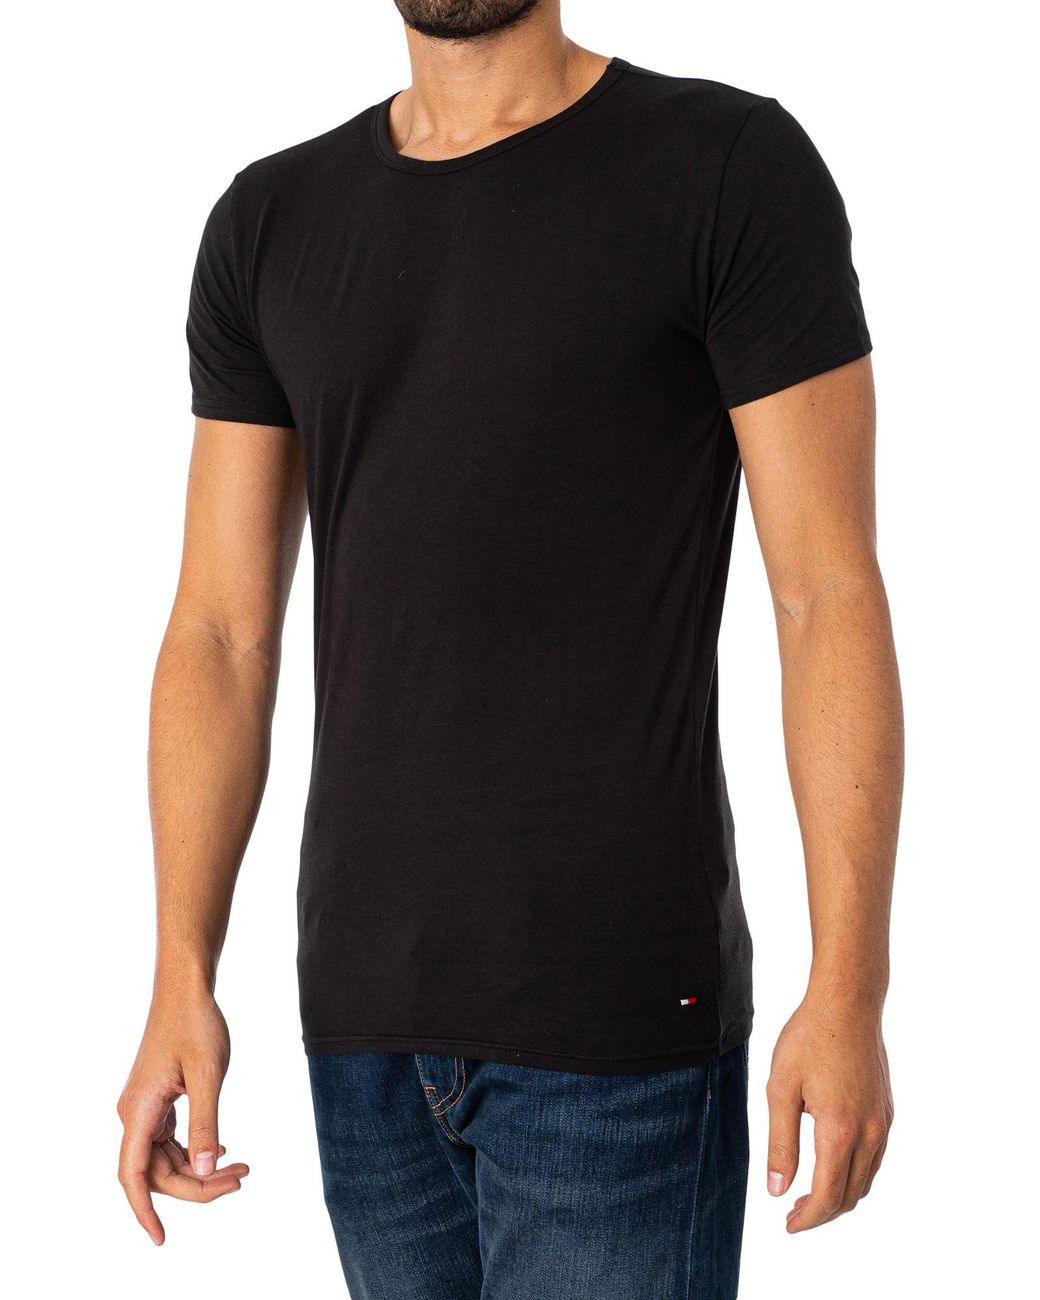 Tommy Hilfiger S Clothes - Shirt - Stretch Crew Neck Tee - 3 Pack - Black -  Size for Men | Lyst